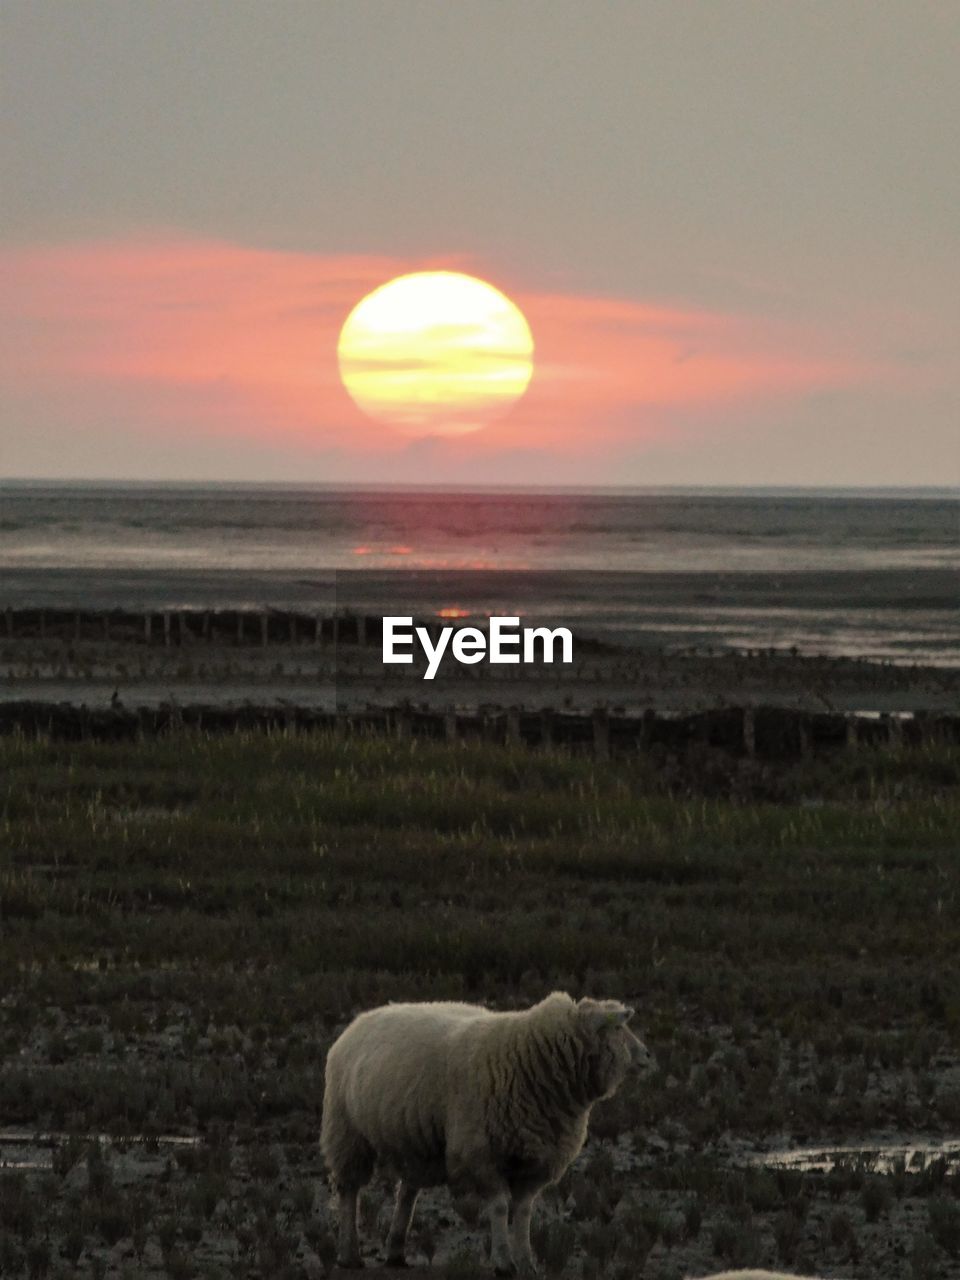 Sheep during sunset in the german waddensea